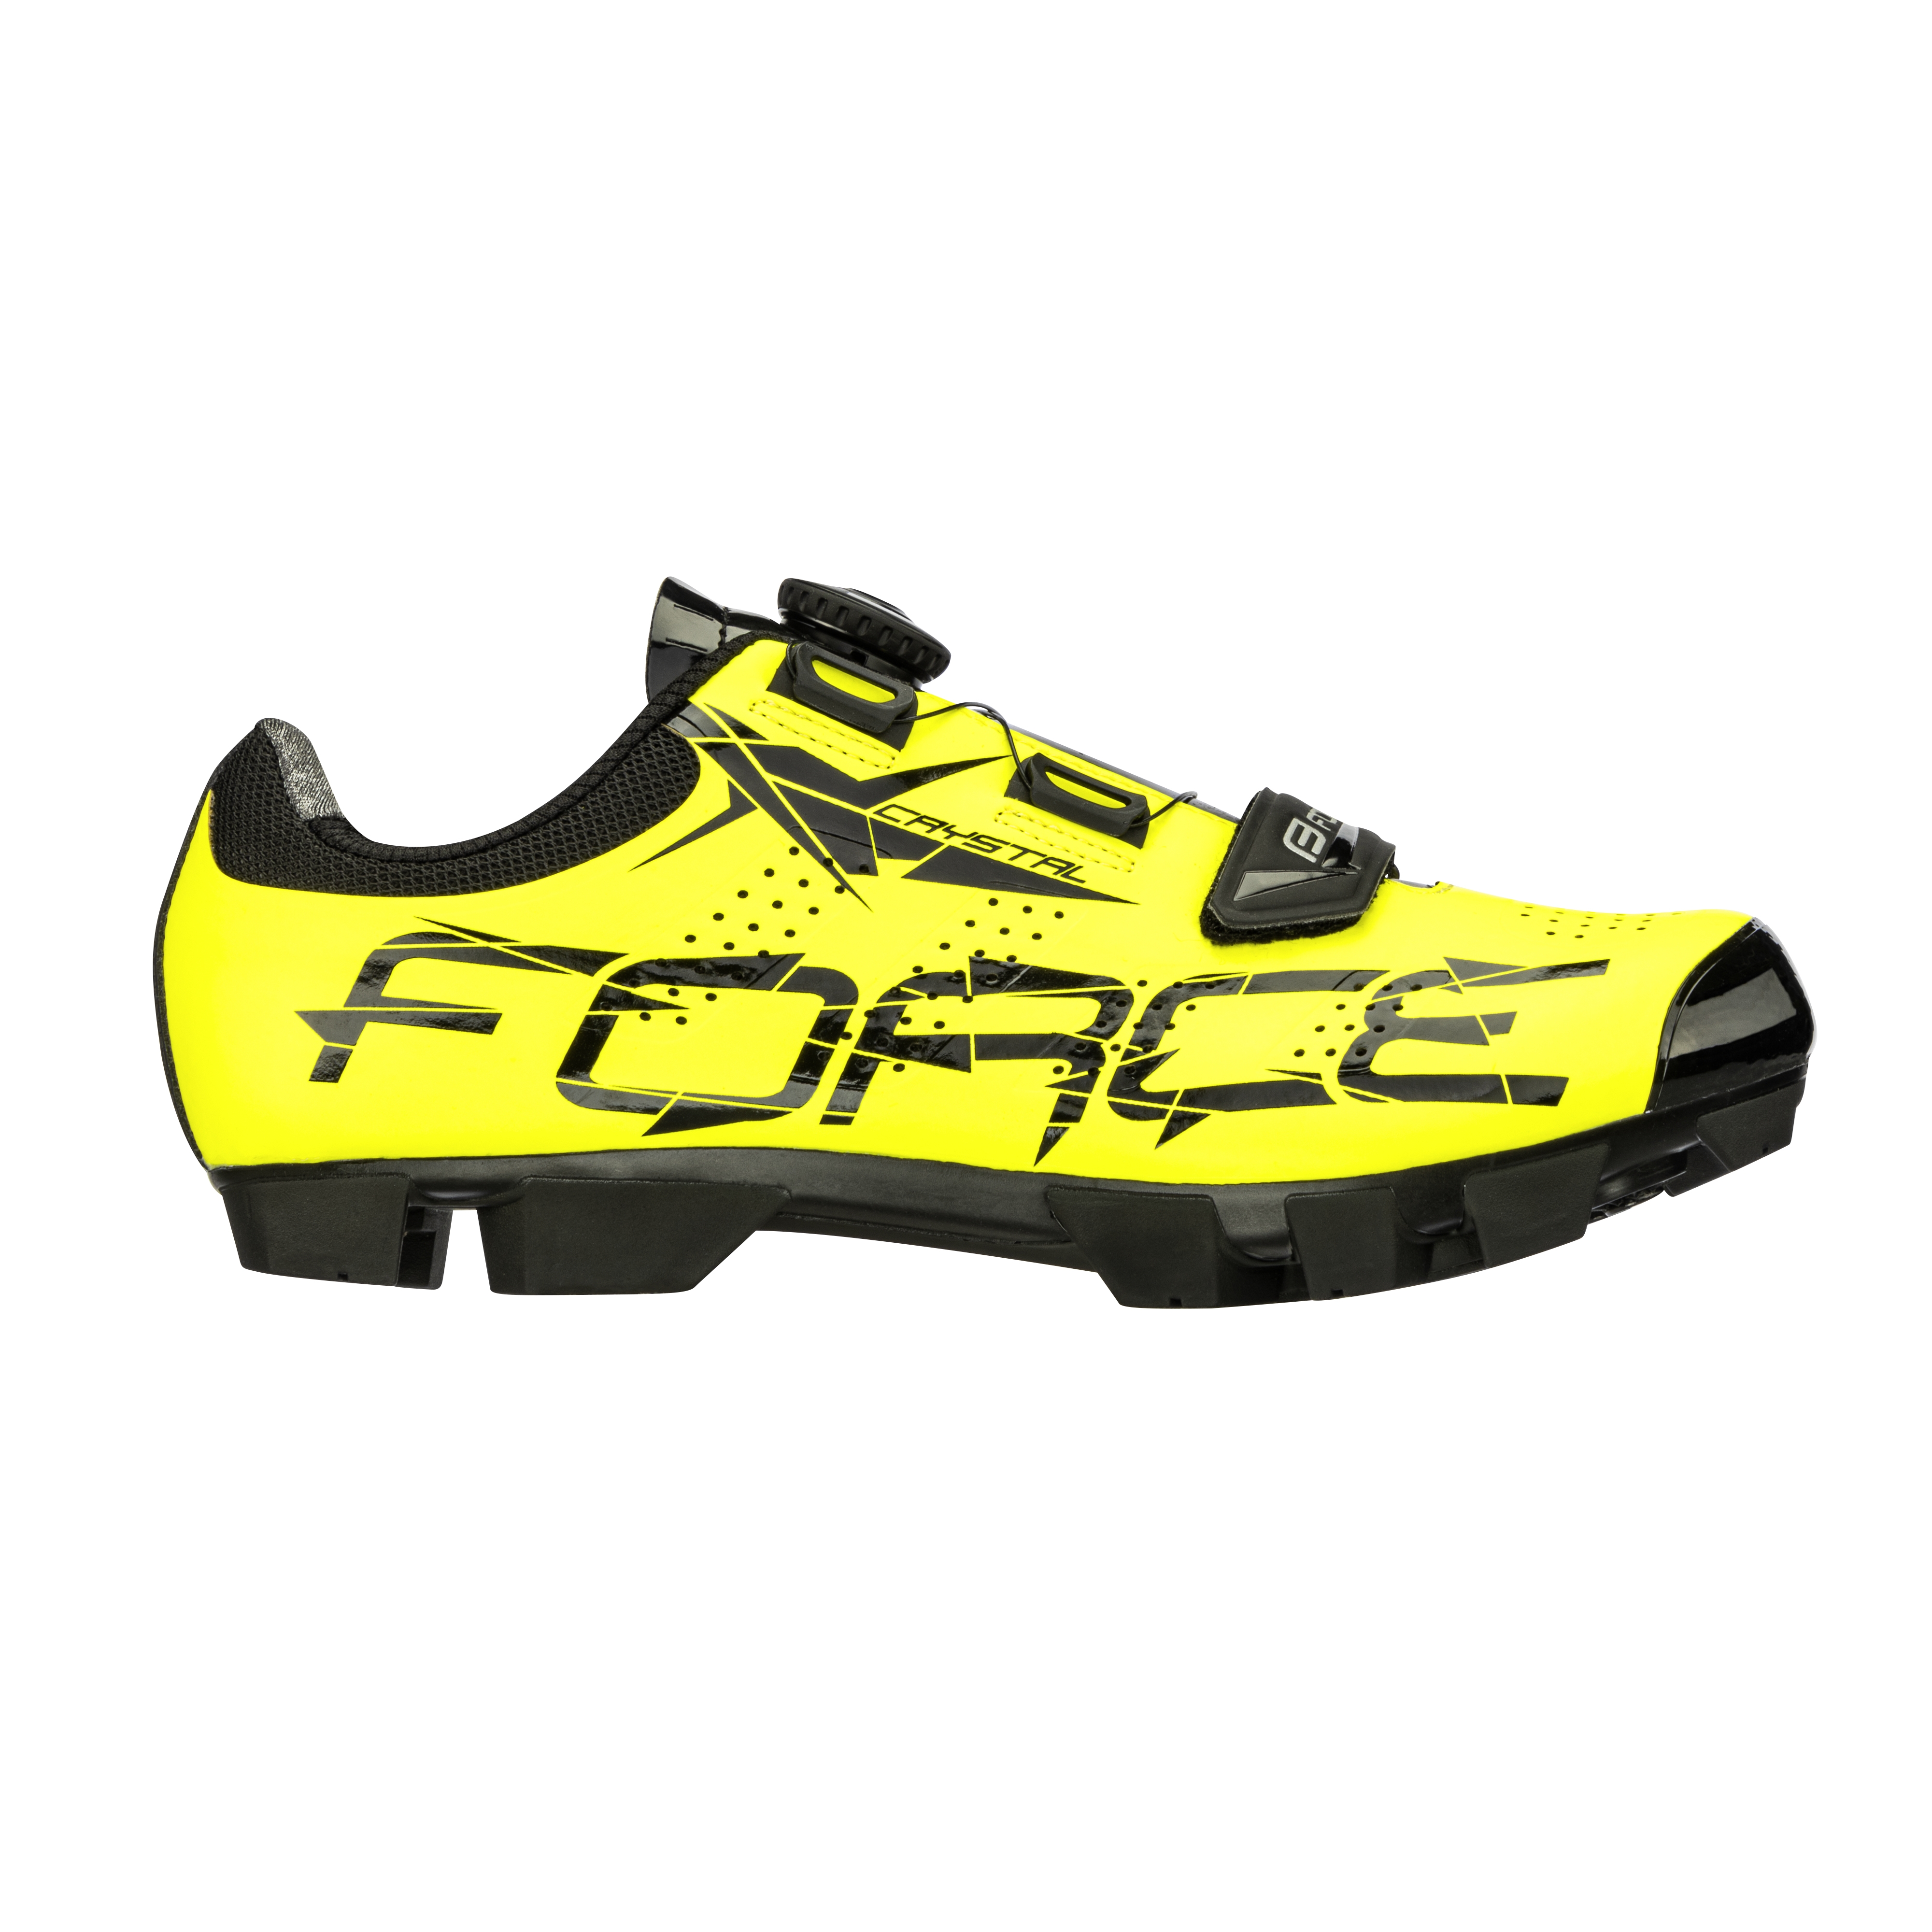 tretry FORCE MTB CRYSTAL, fluo 48